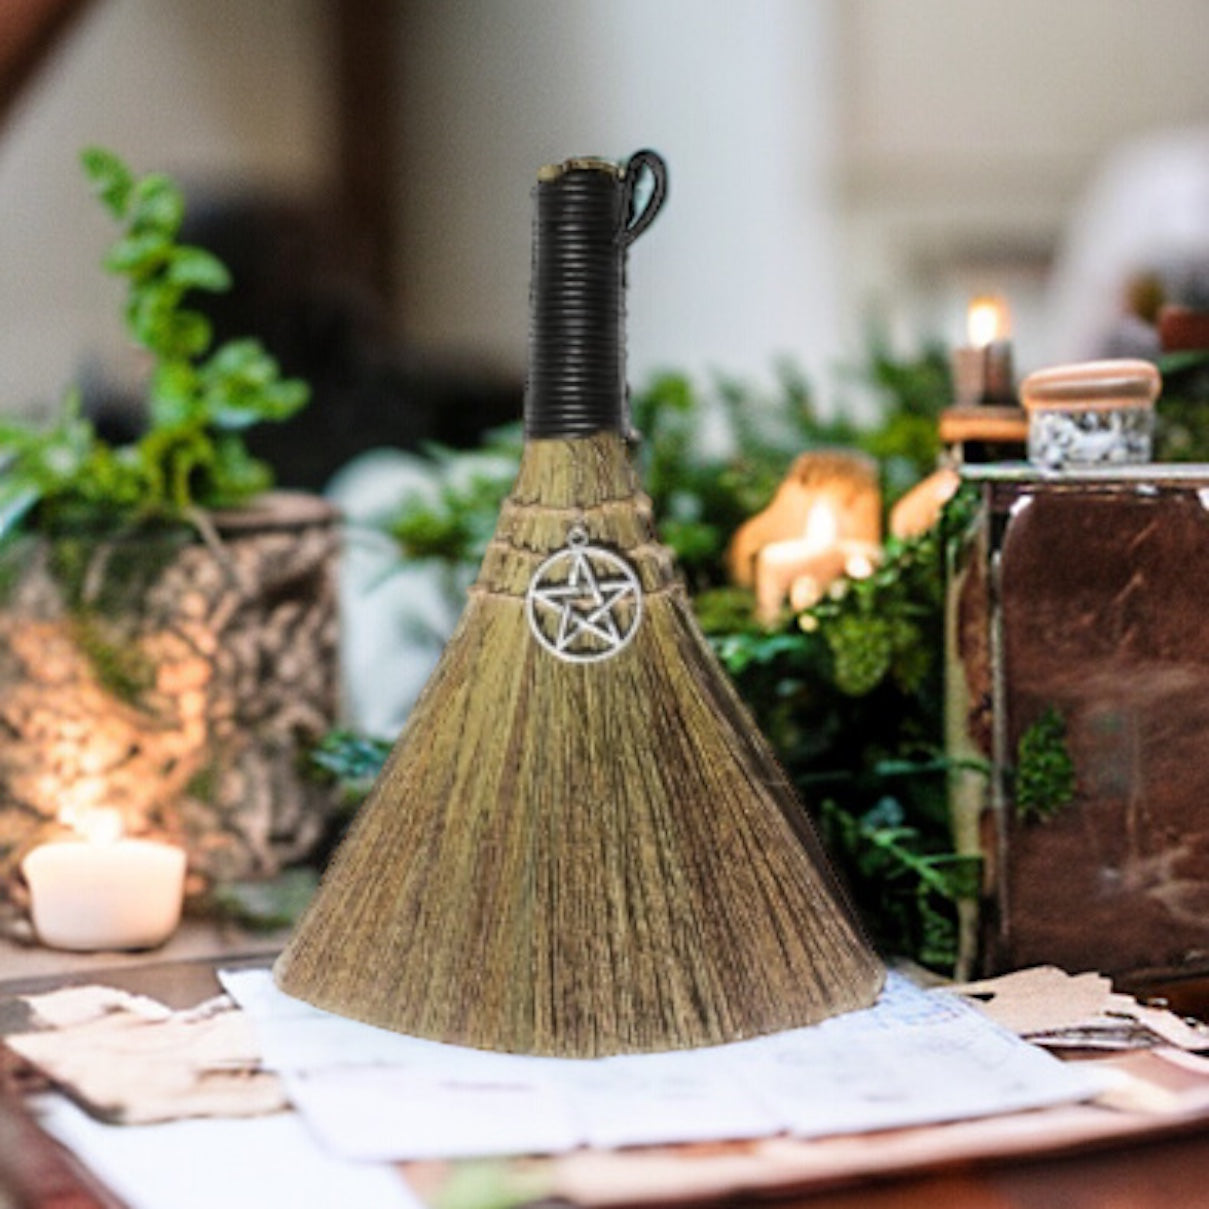 BESOM || WITCHES BROOM - PENTACLE